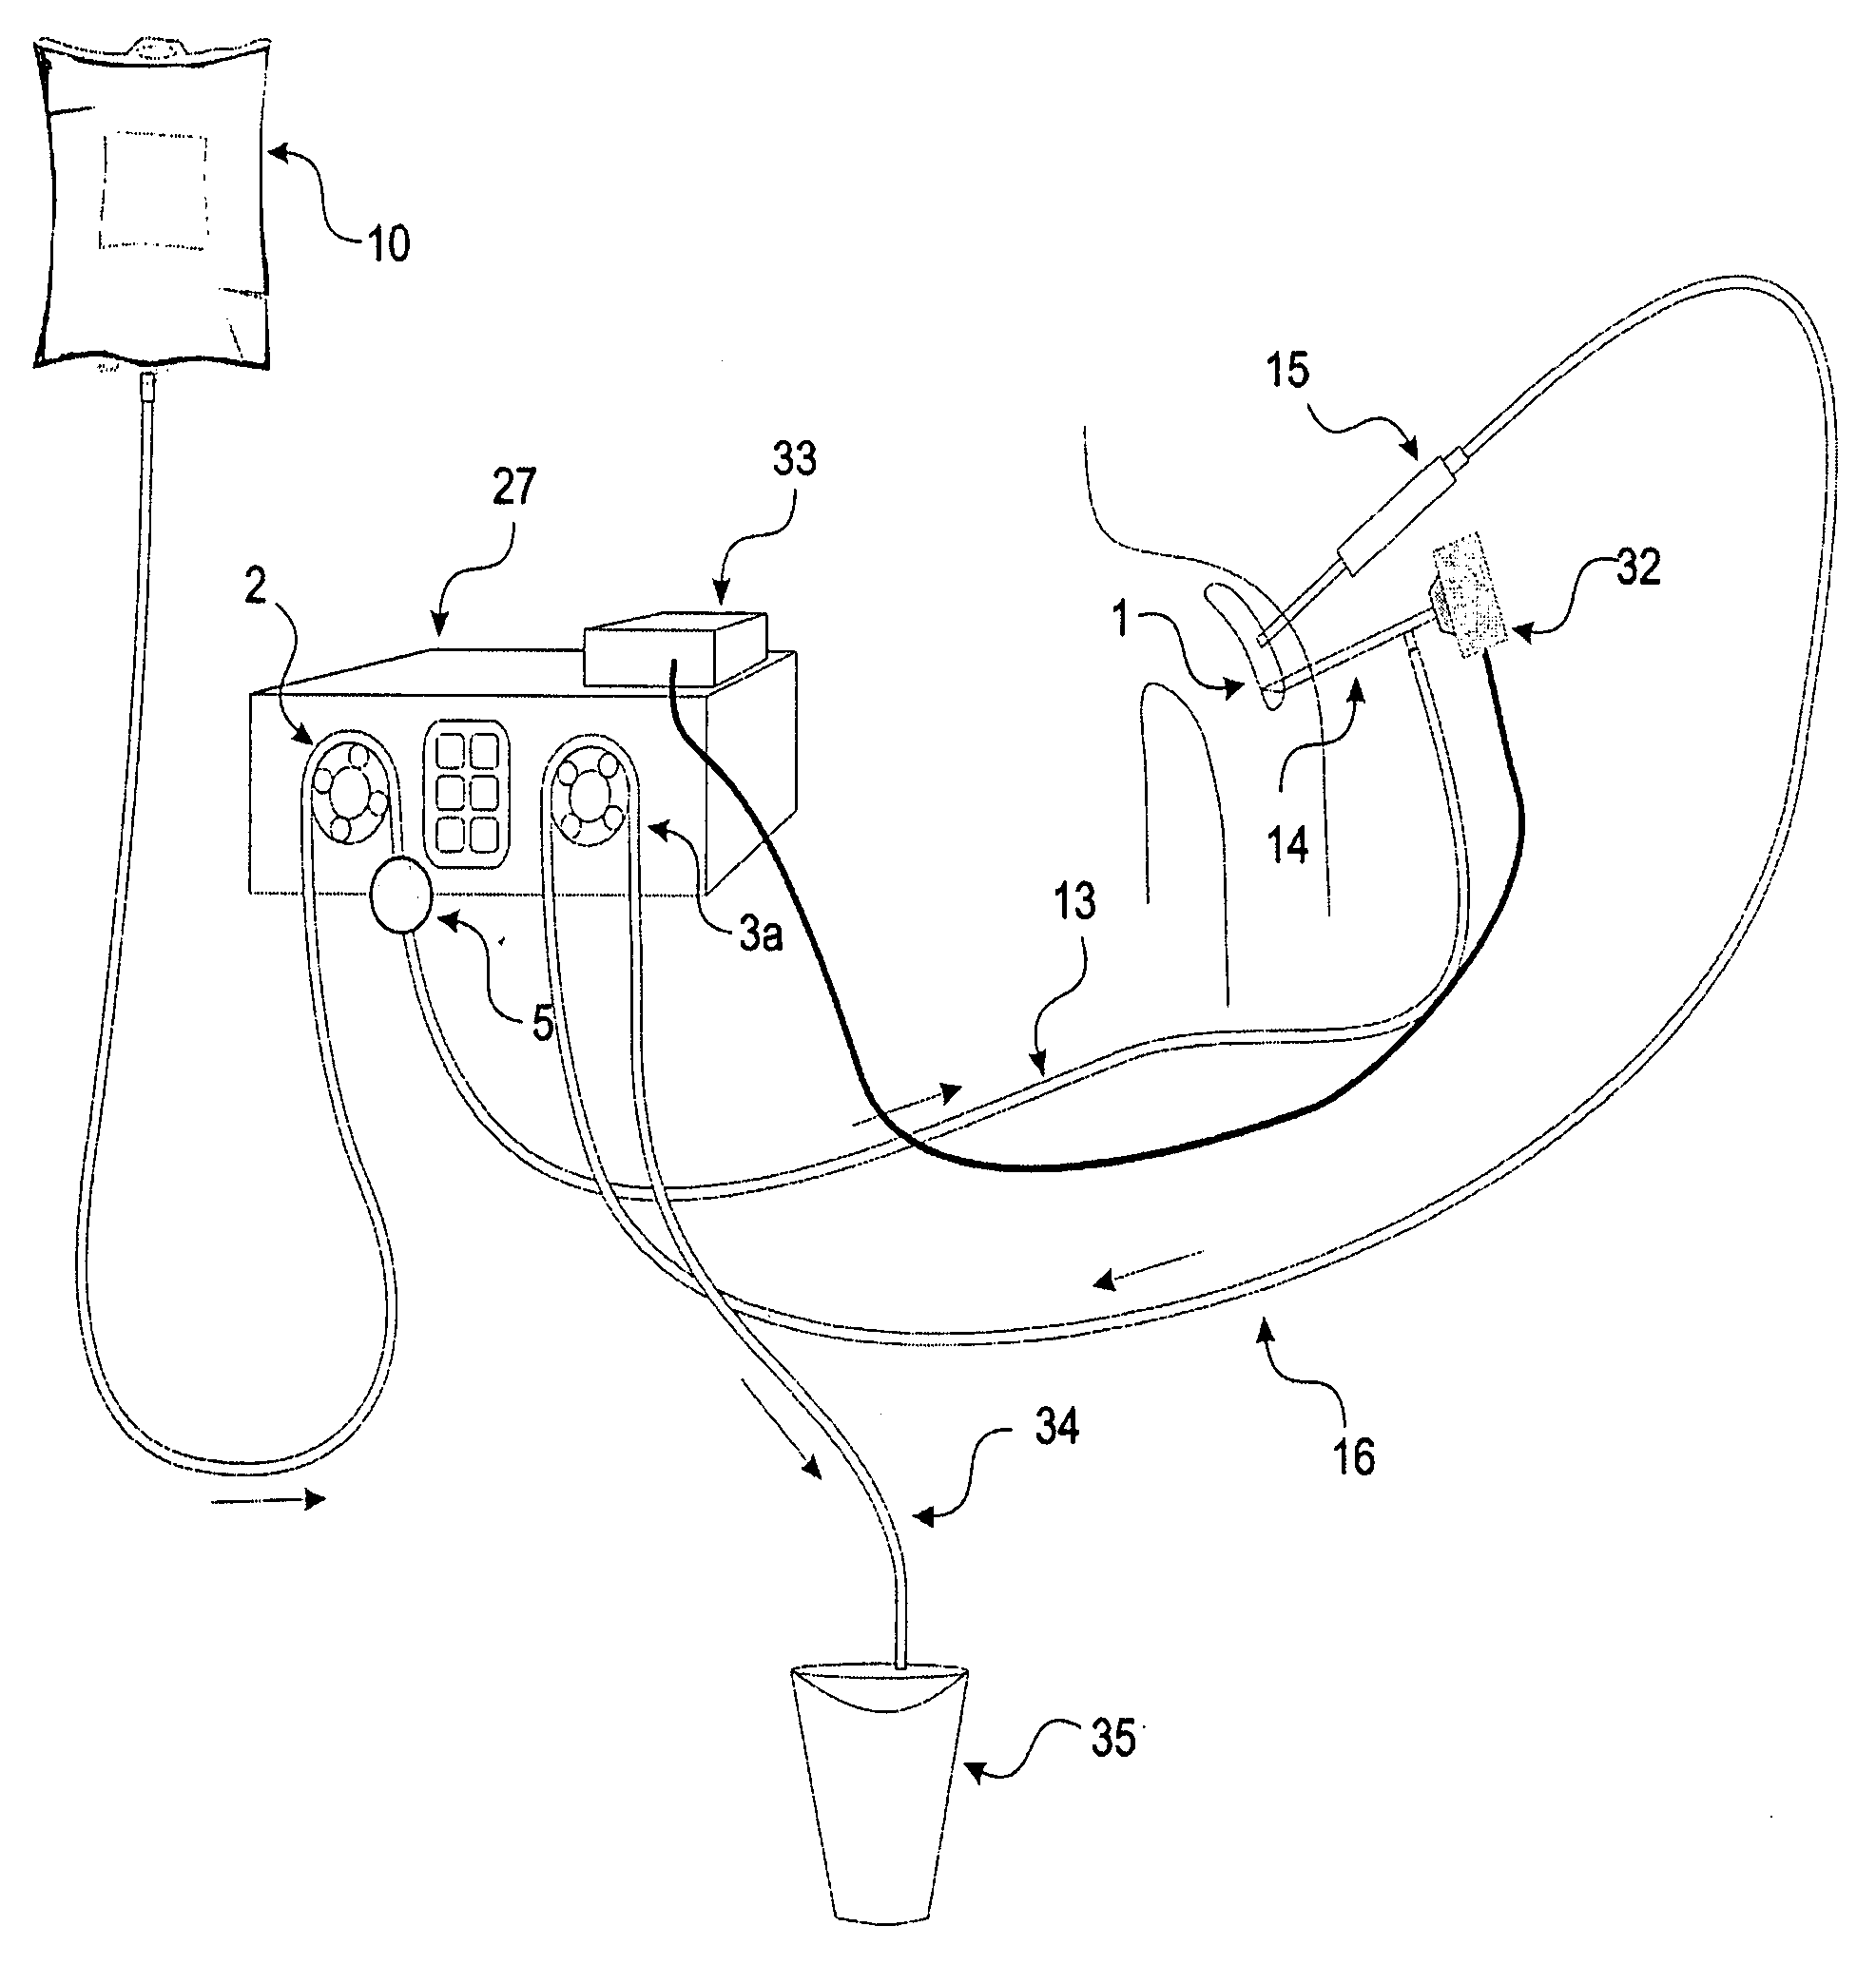 Method and device for irrigation of body cavities